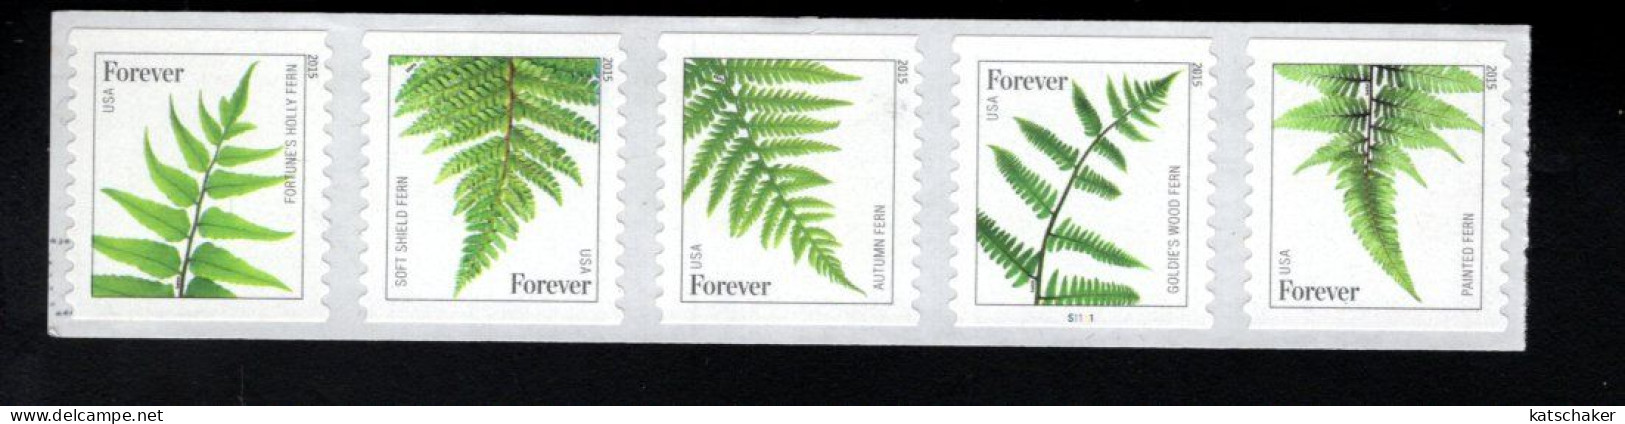 1857519666 2015 SCOTT 4977C (XX)   POSTFRIS MINT NEVER HINGED   - FLORA - FERNS WITH PLATE PCN S1111 - Unused Stamps